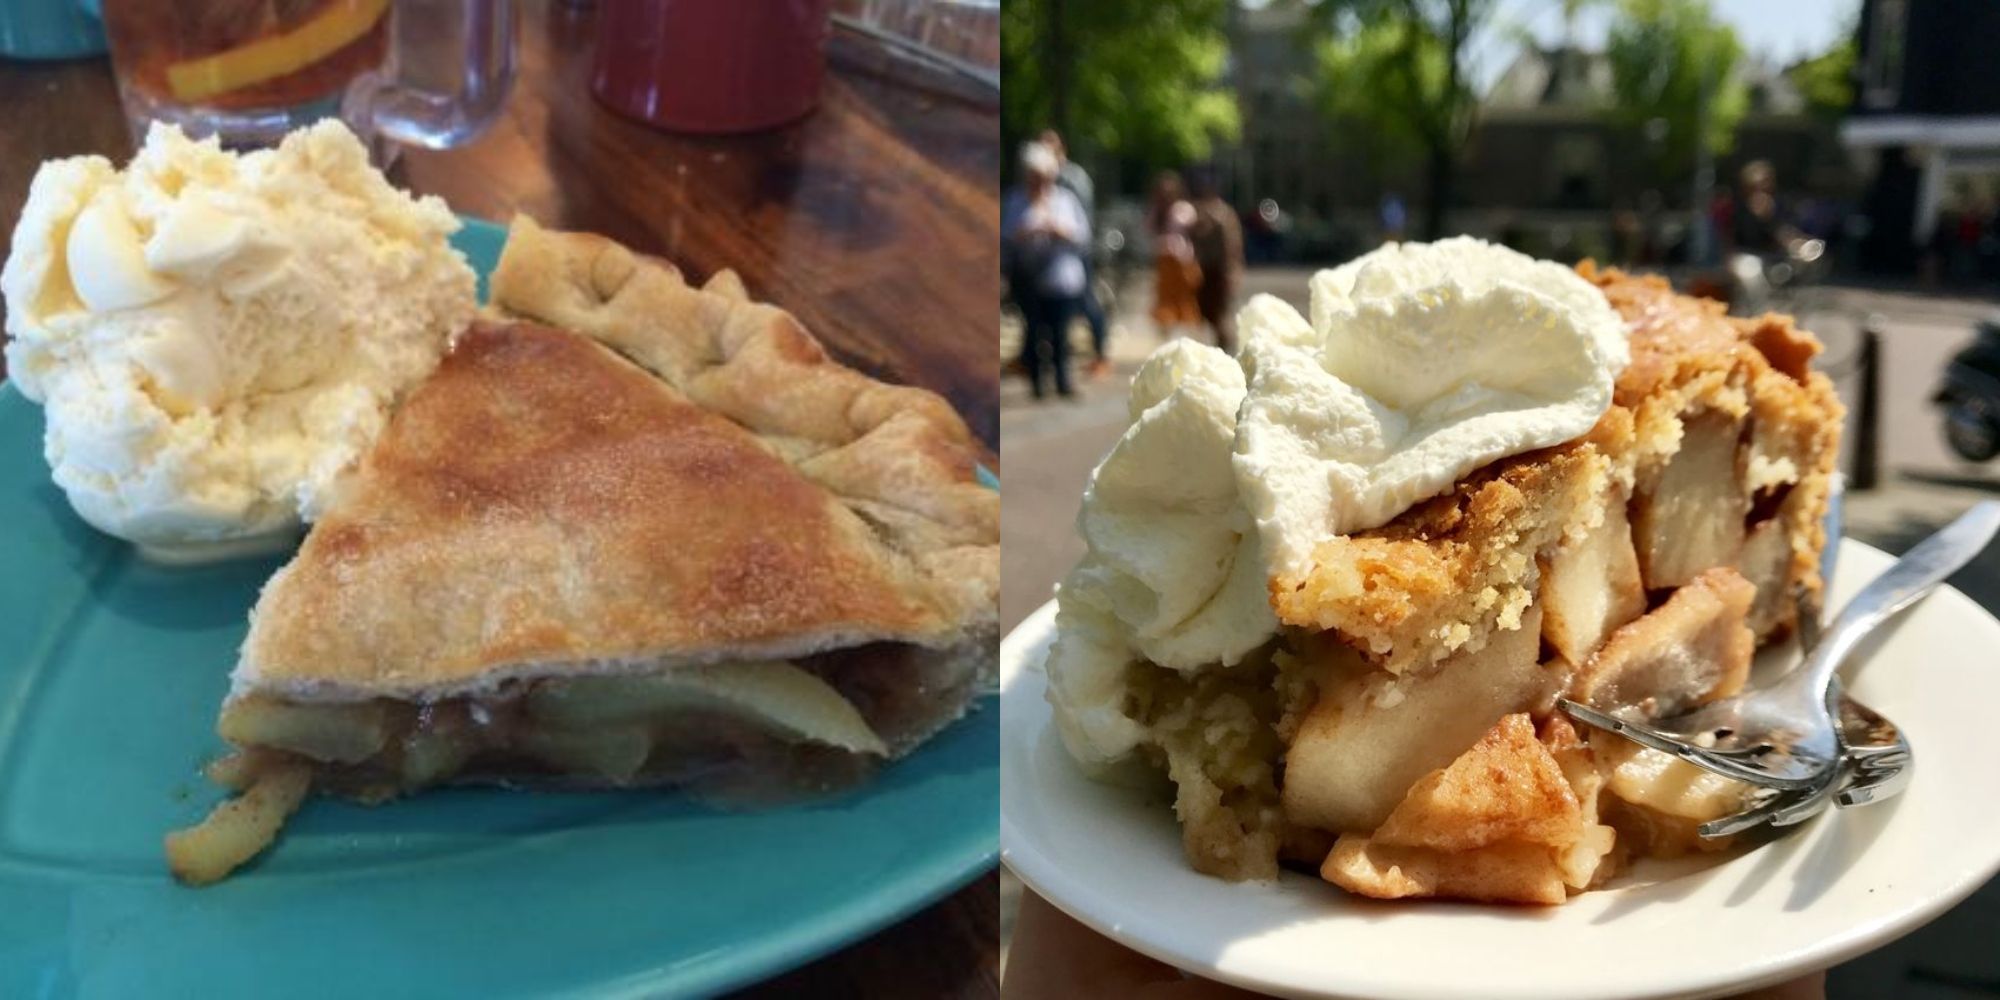 slice of apple pie with scoop of vanilla ice cream on blue plate and apple pie on white plate outside